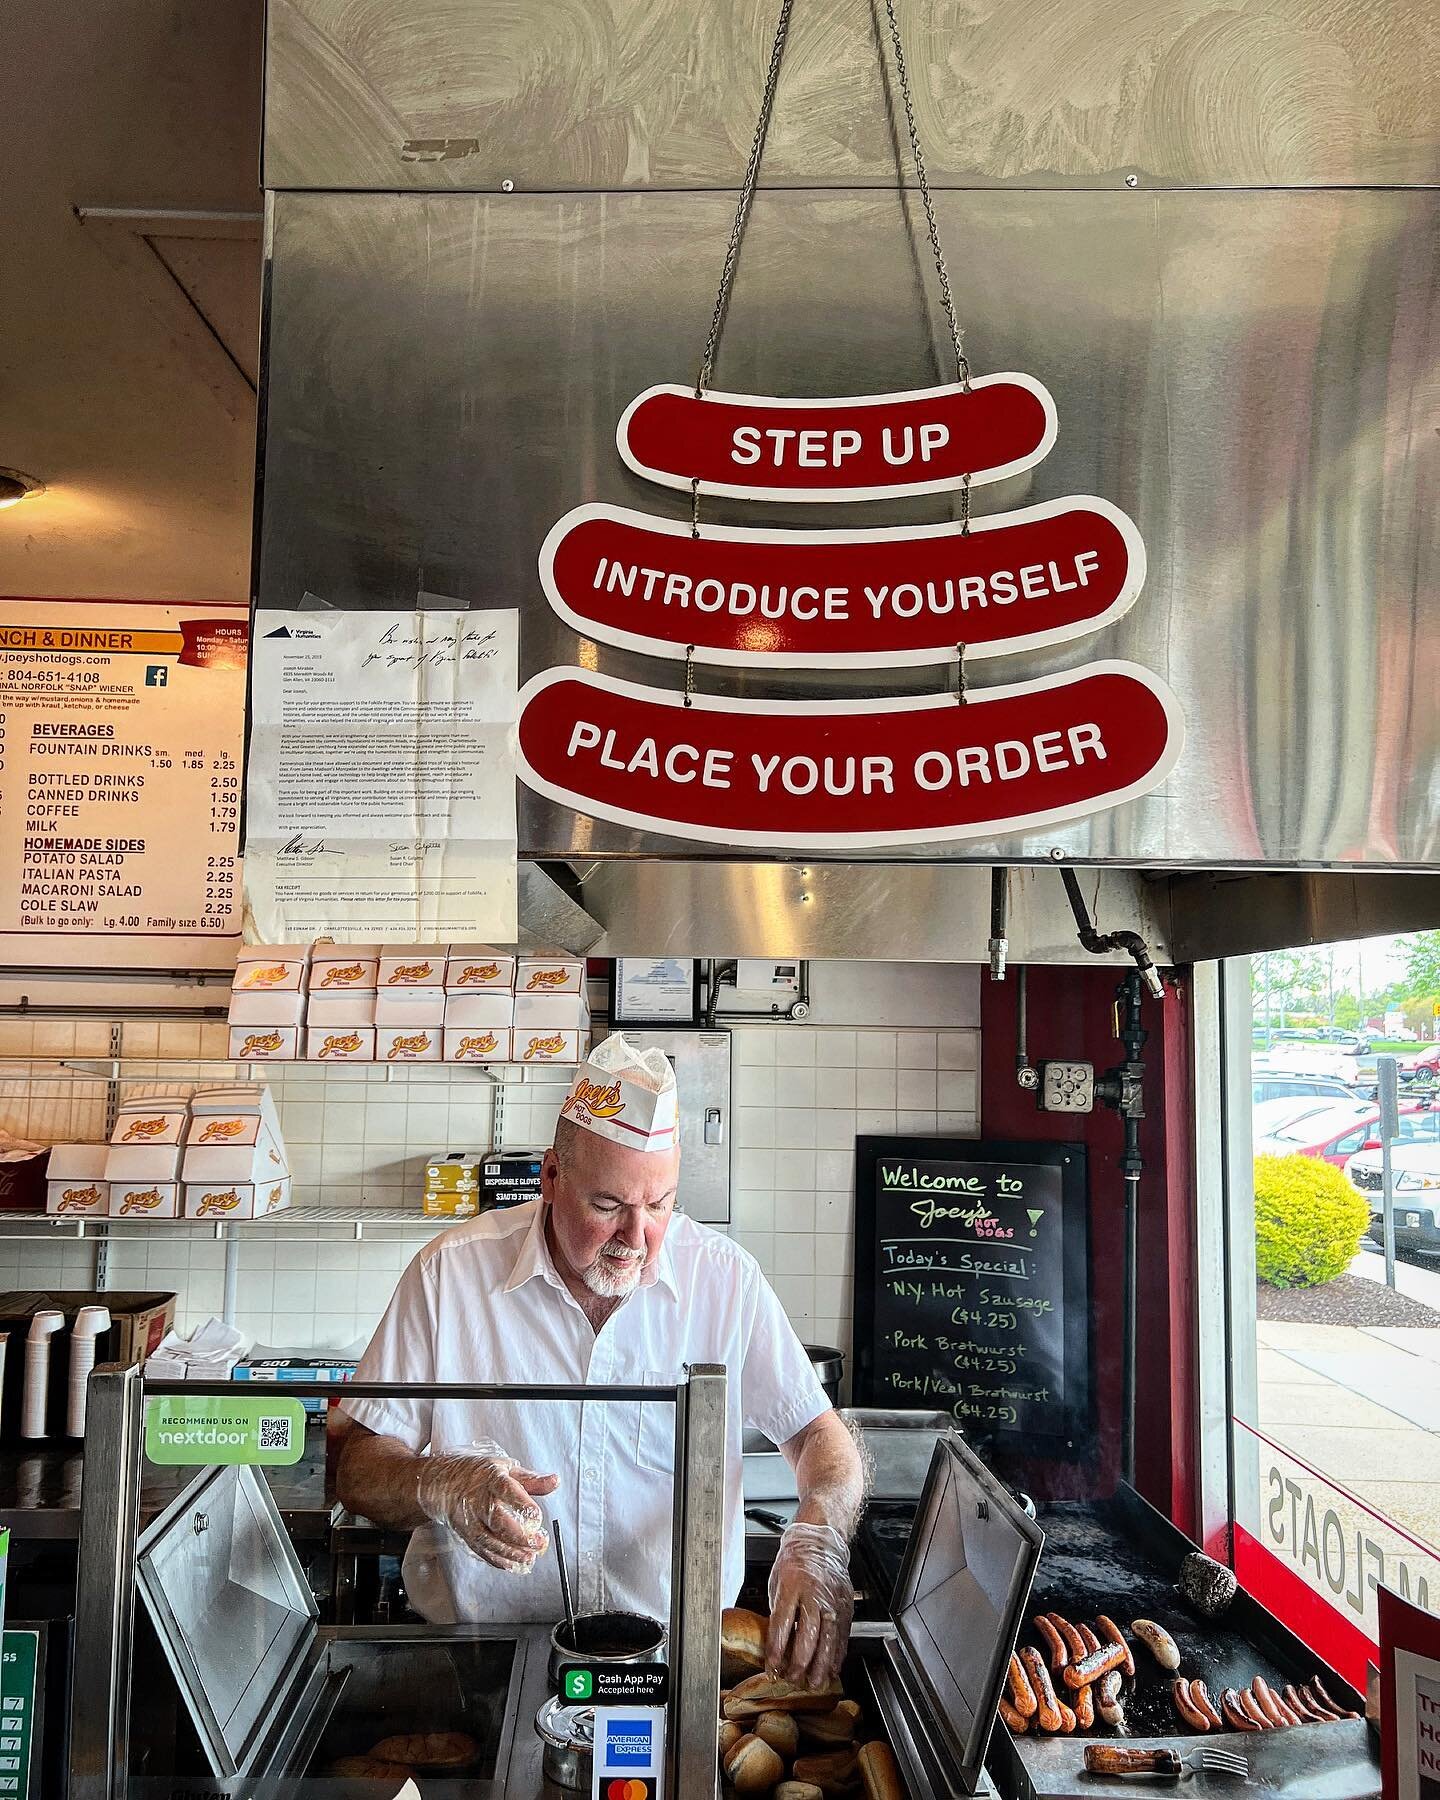 Hot dog business trip! Joey Mirabile Sr serves hot dogs in Richmond just as his dad did in the 1930s in Norfolk: chili, onions, mustard. Virginia Folklife and @cultural_vibrancy are co-programming part of the Richmond Folk Festival this October, we v